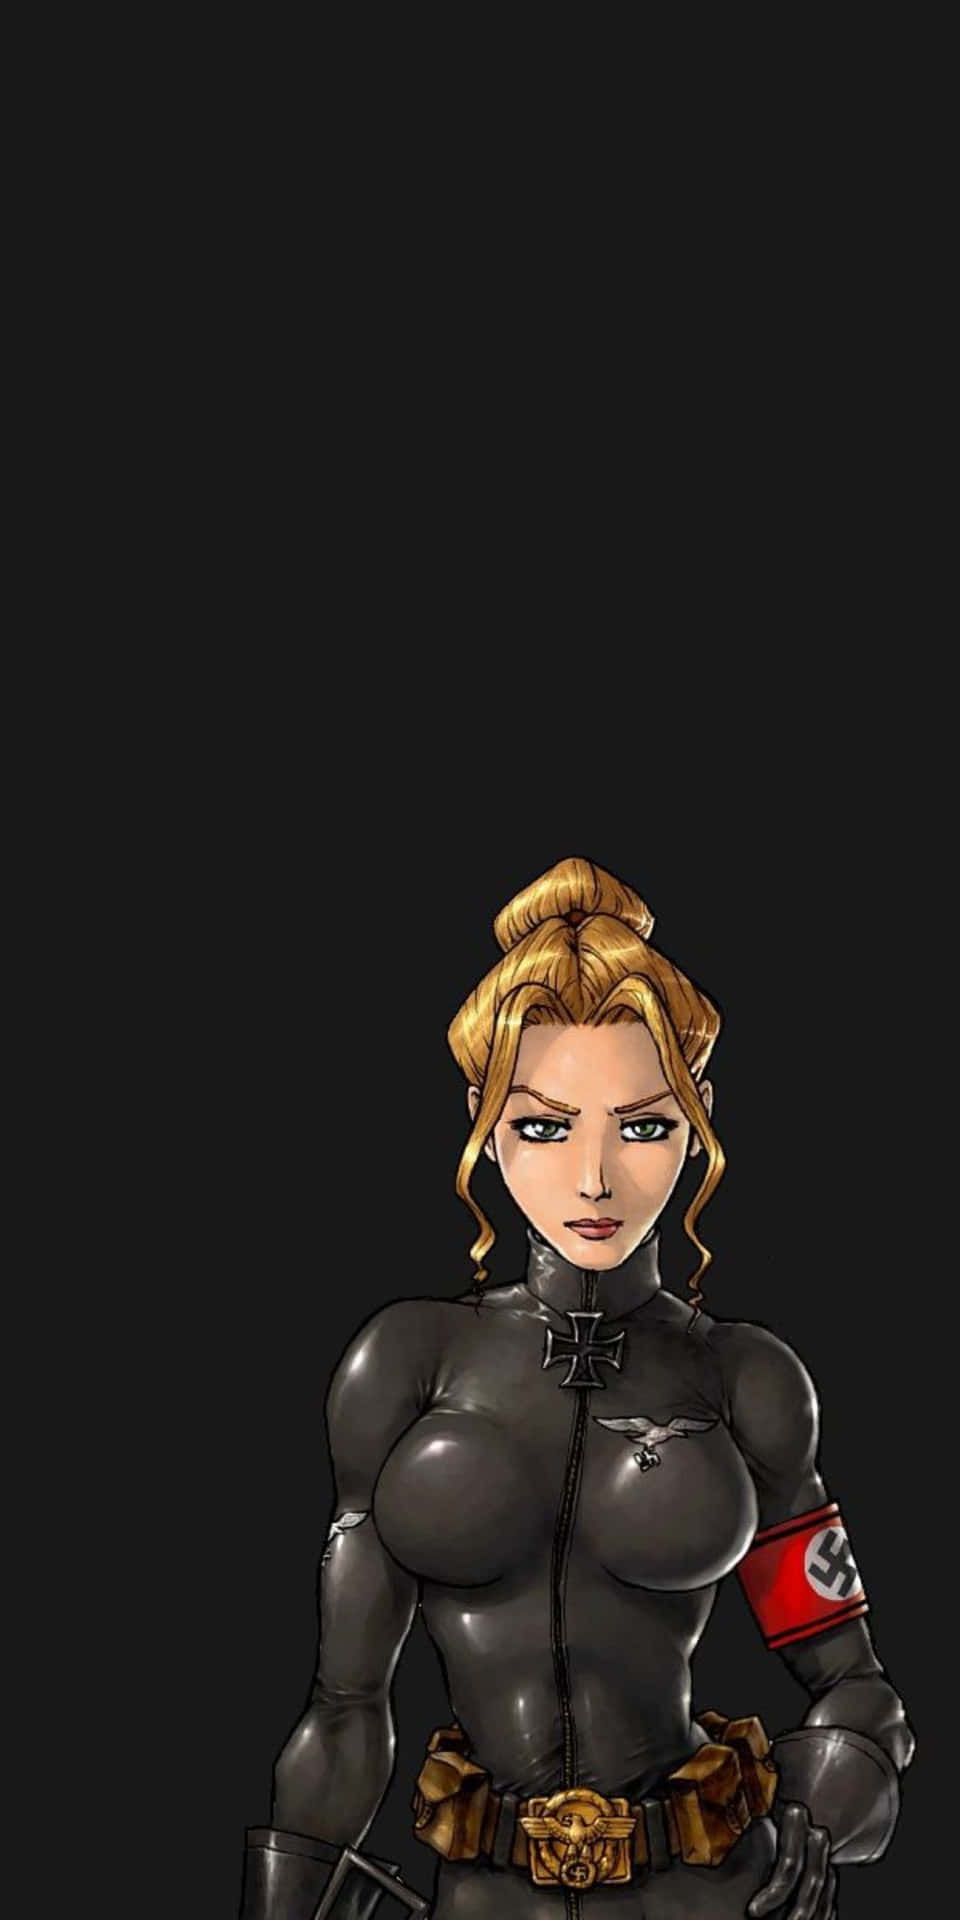 A Female Character In A Black Outfit Holding A Gun